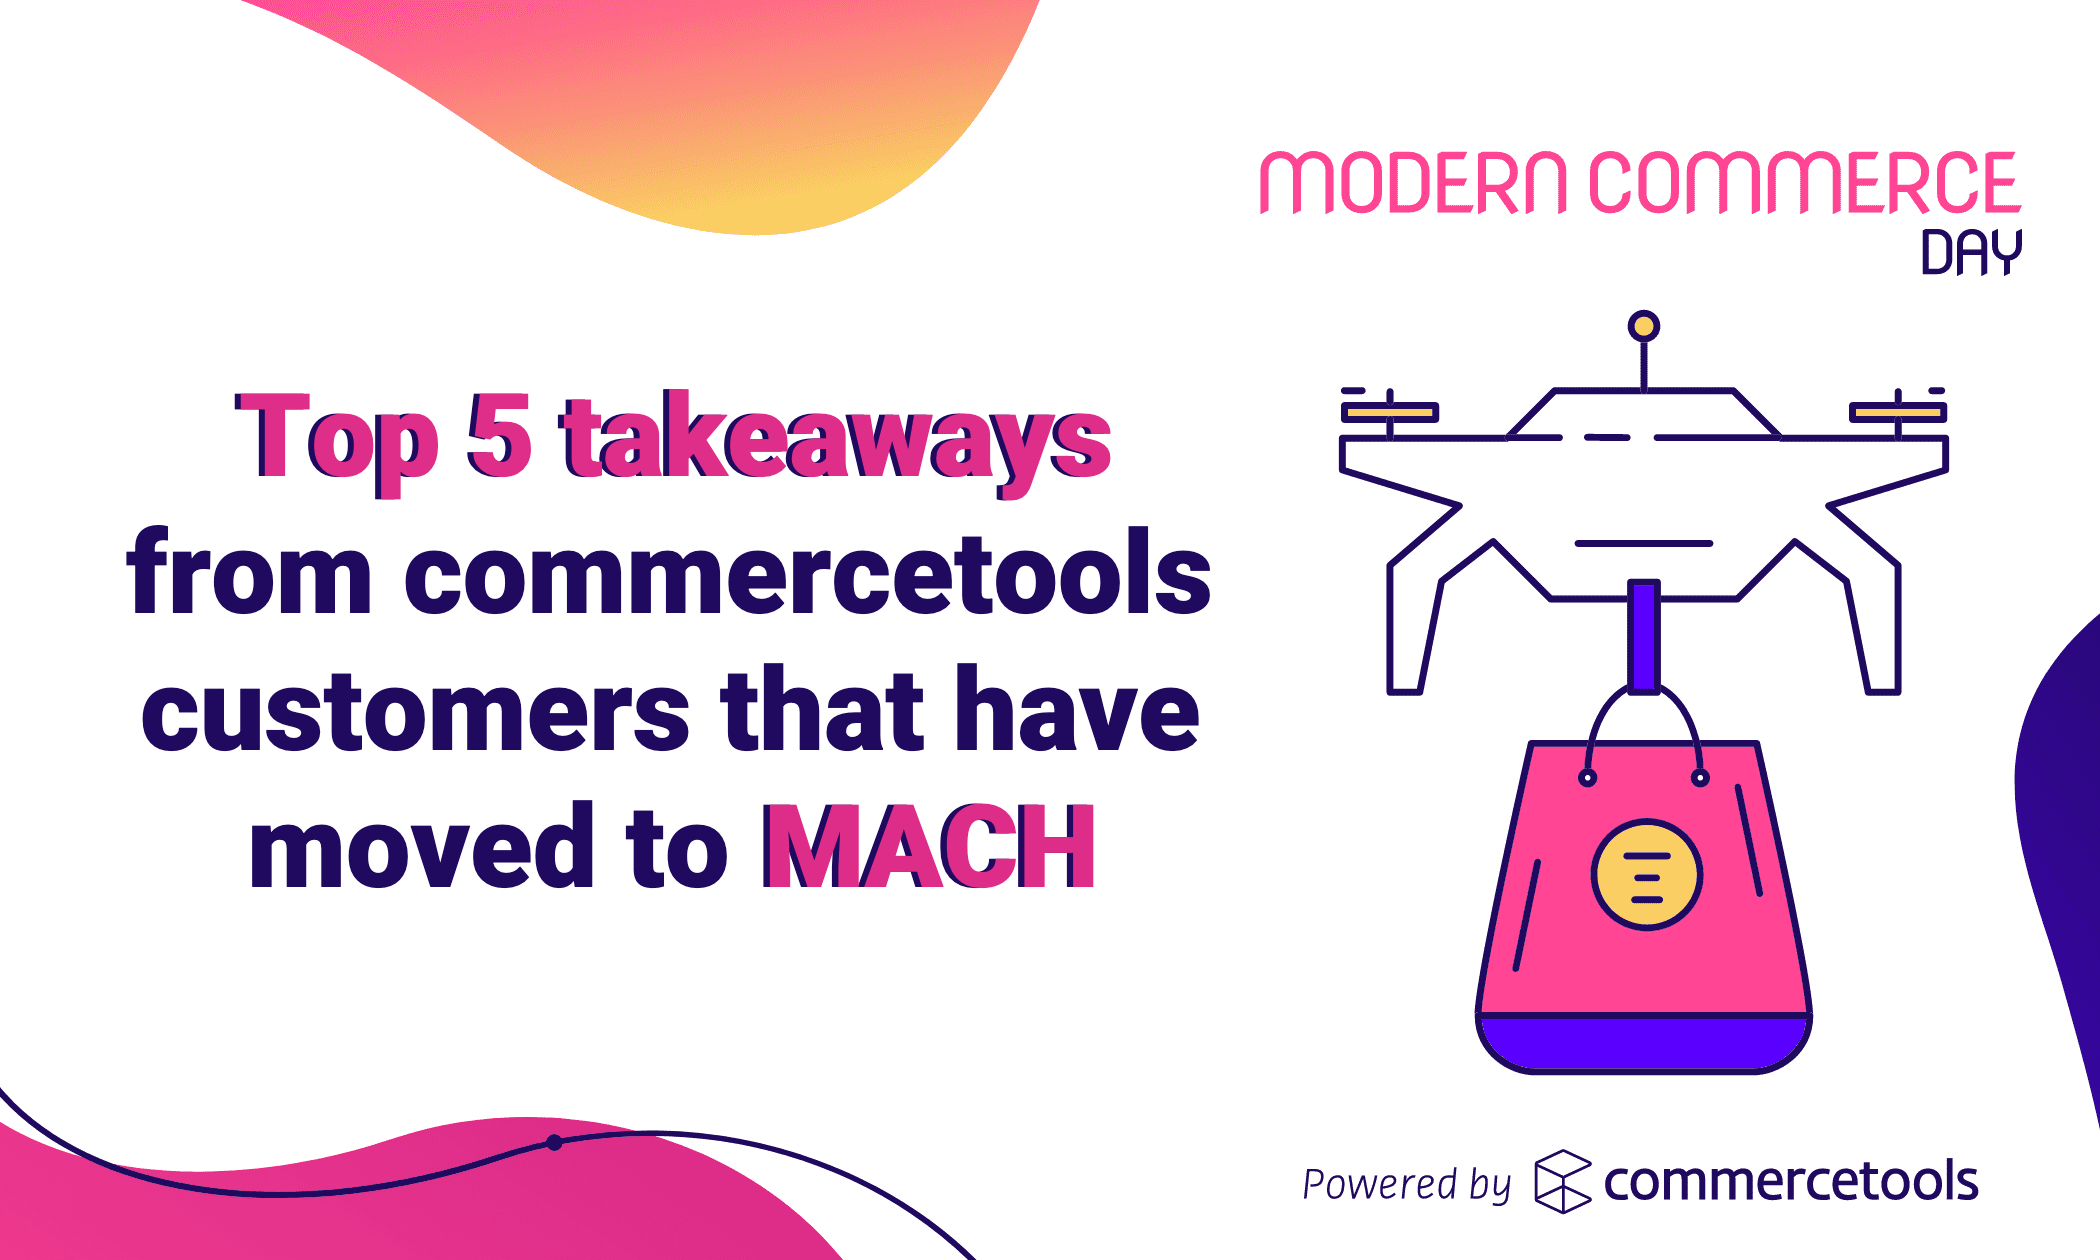 Top 5 takeaways from customers that have moved to MACH